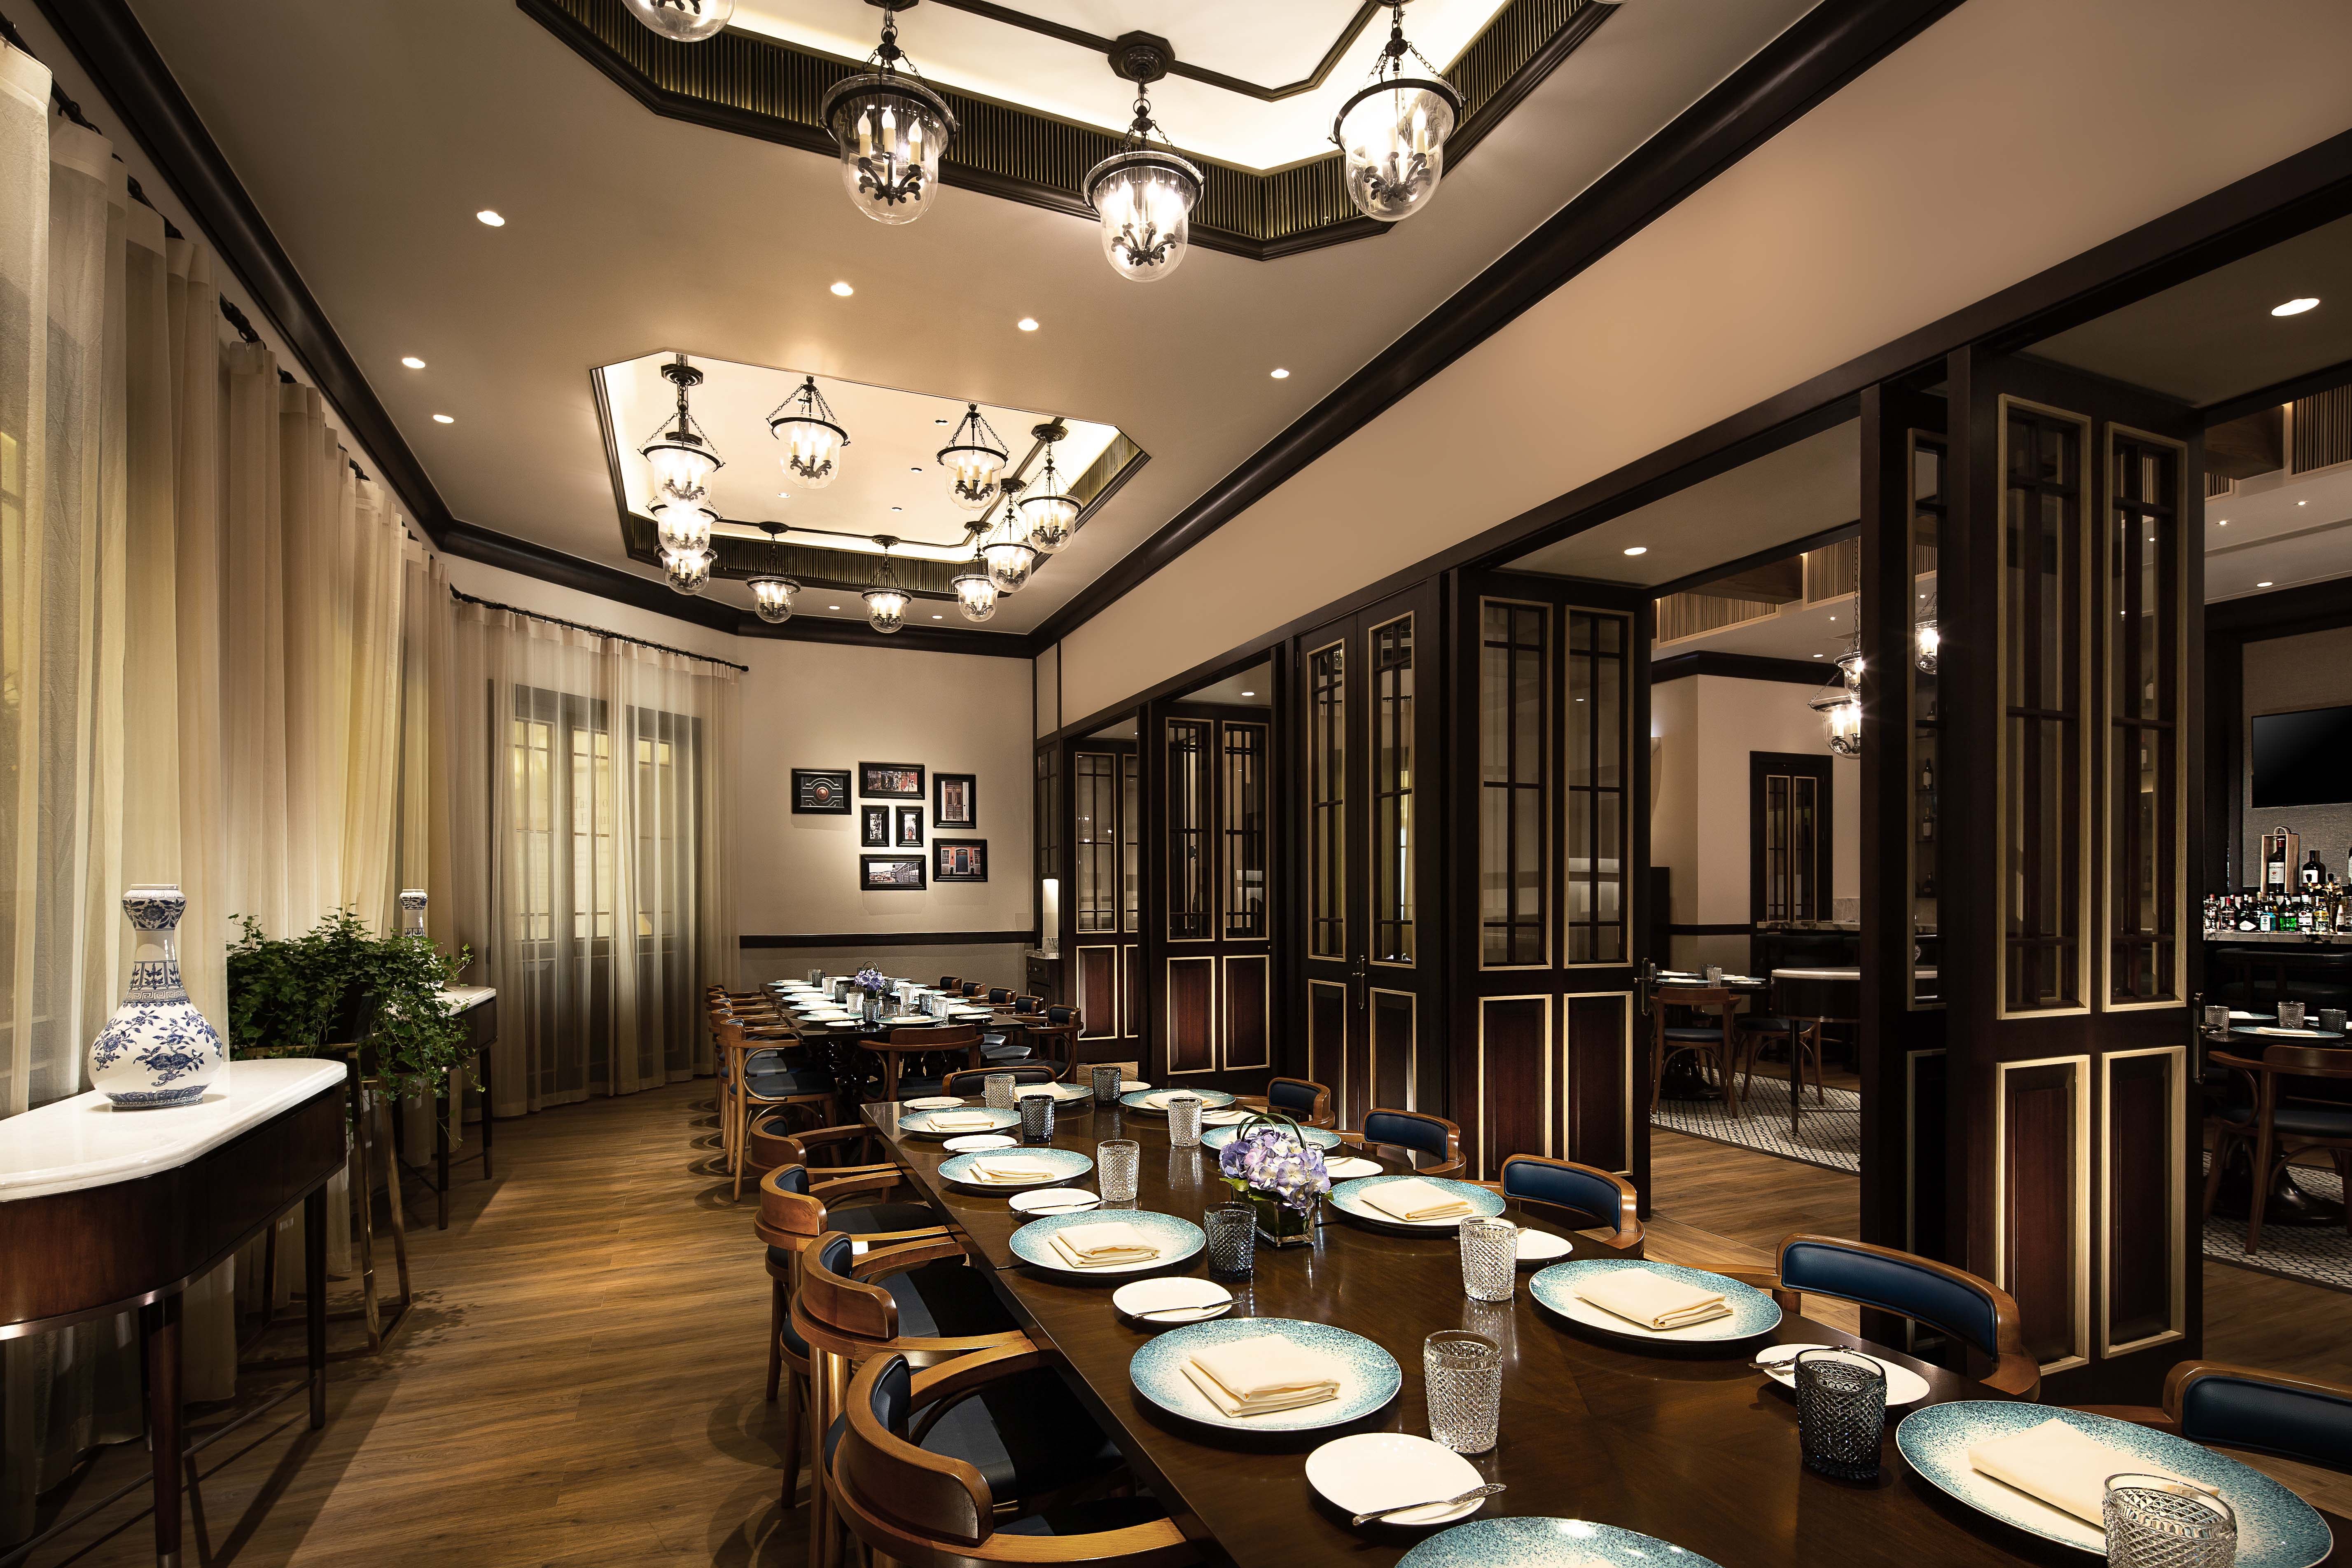 A private dining room at Chiado. Photo: handout